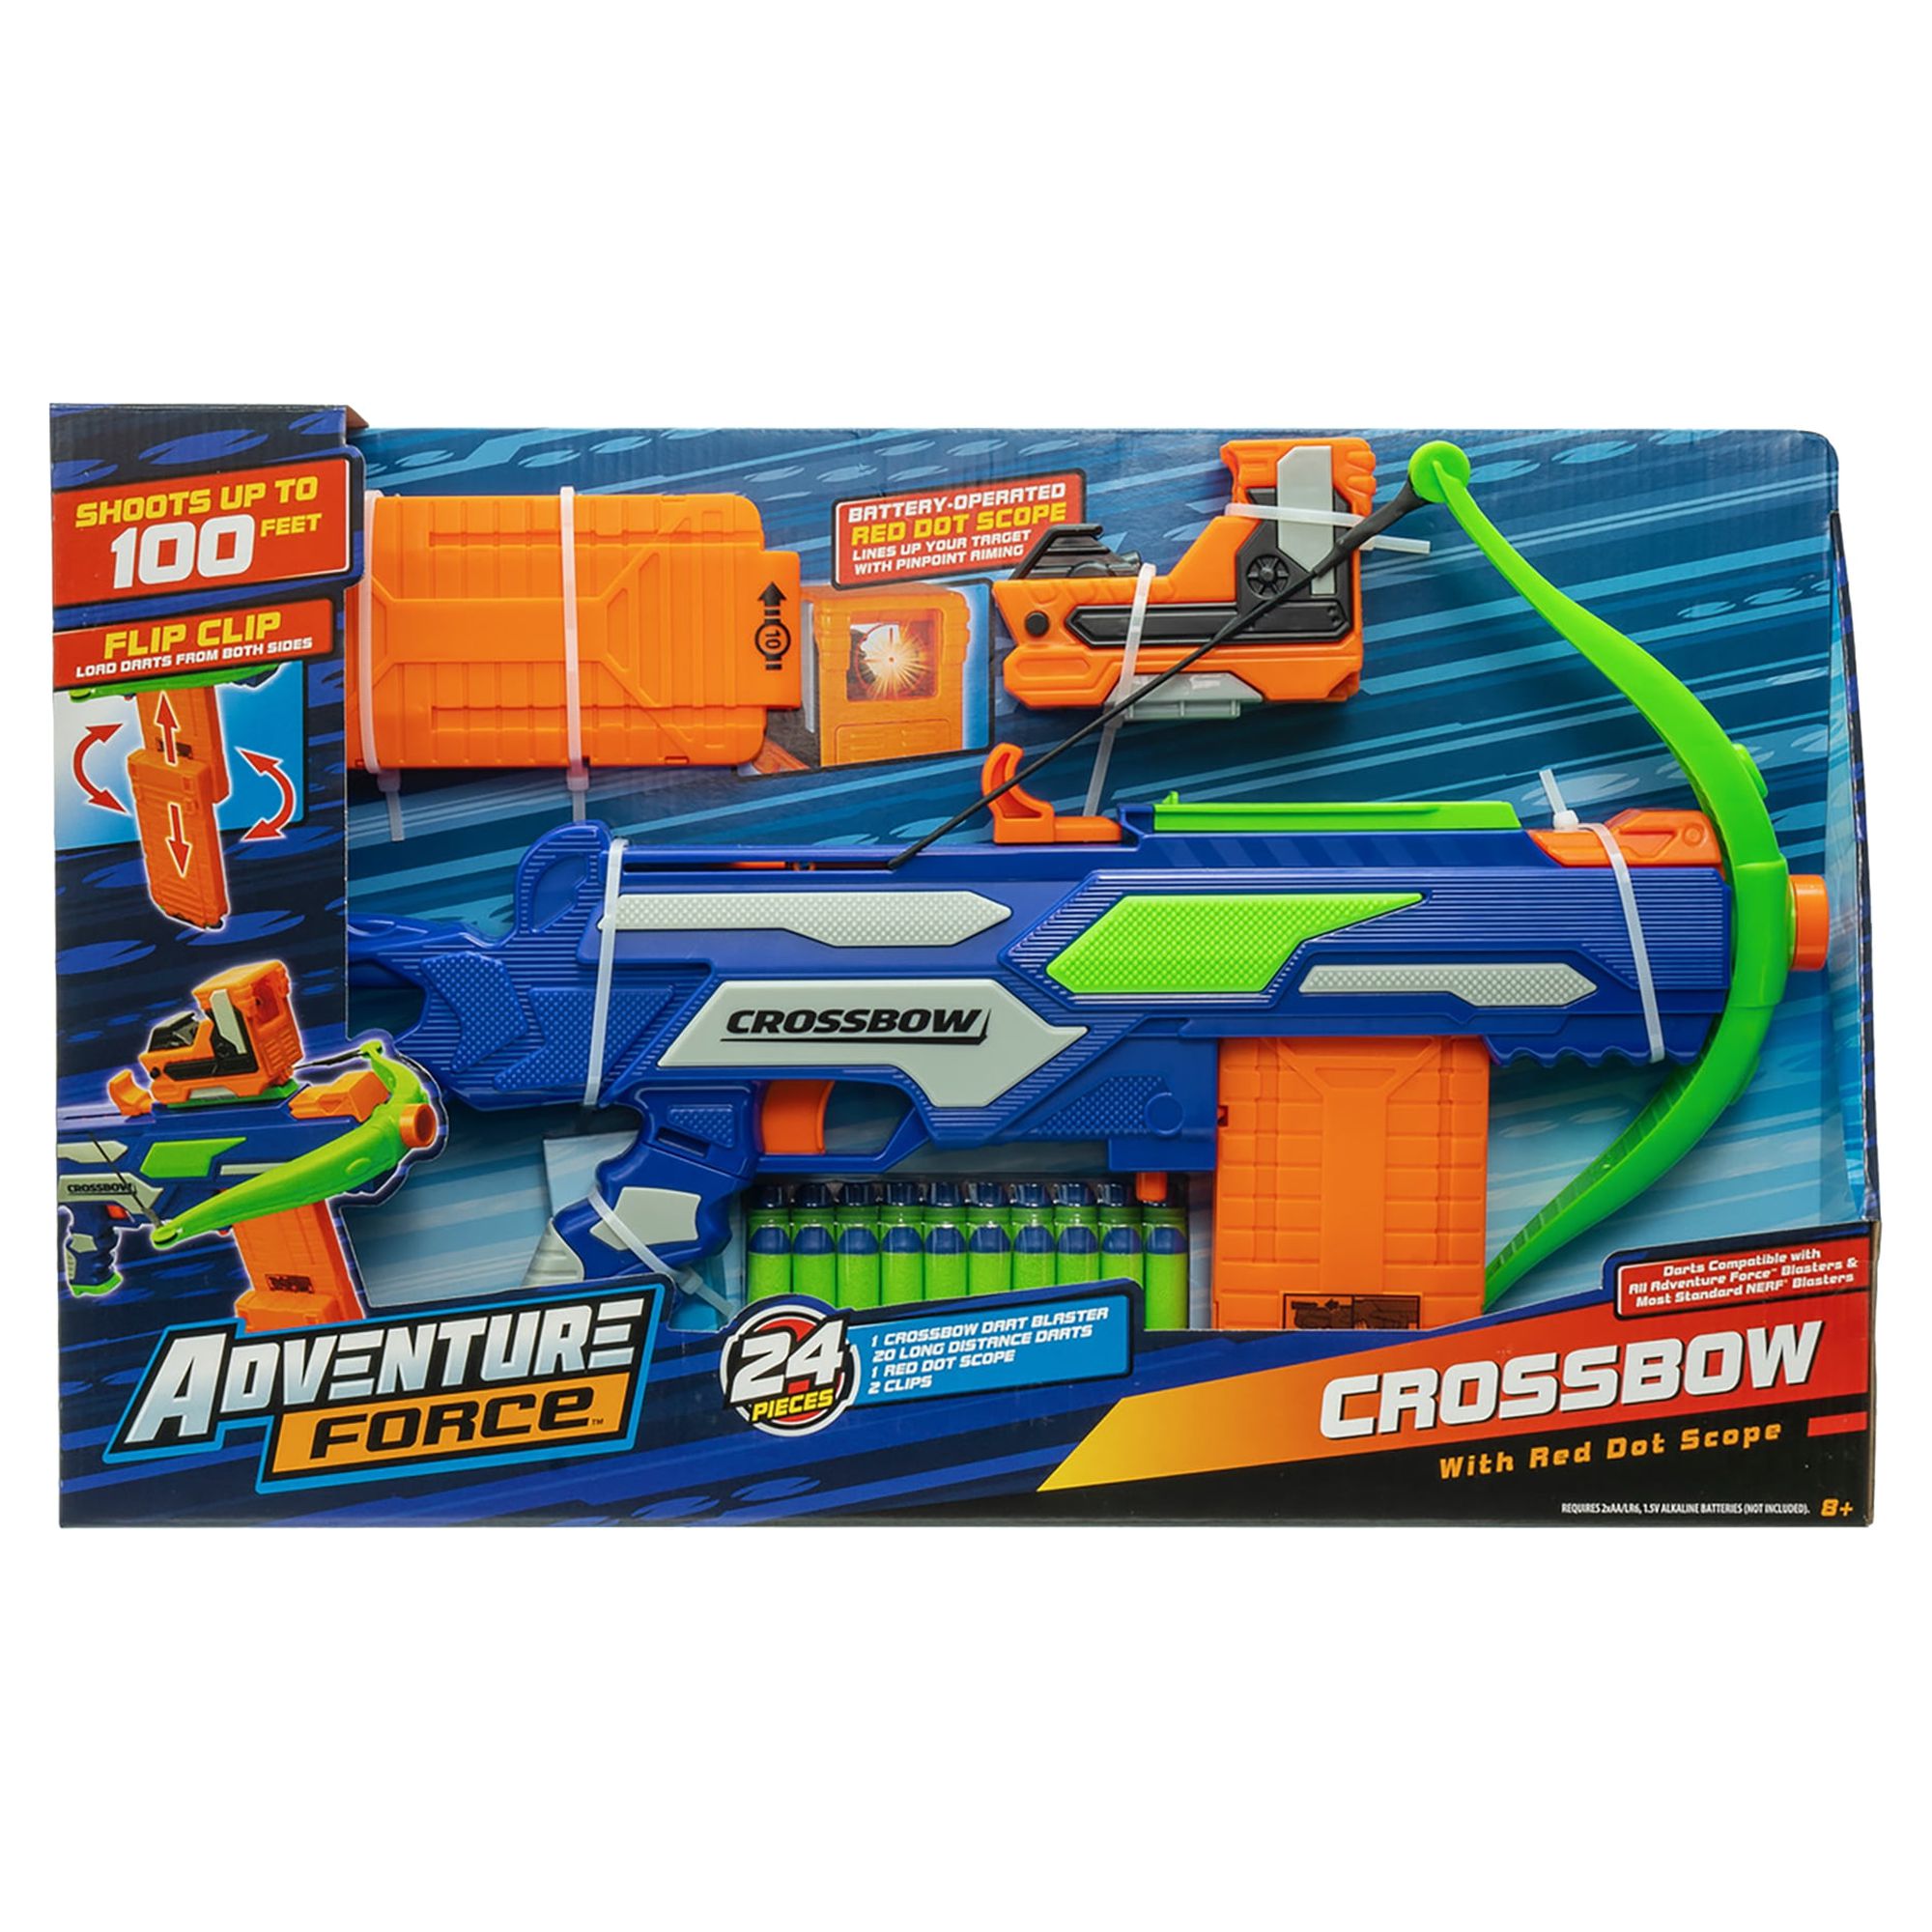 Adventure Force Crossbow Dart Blaster, Ages 8 Years and up - image 2 of 8